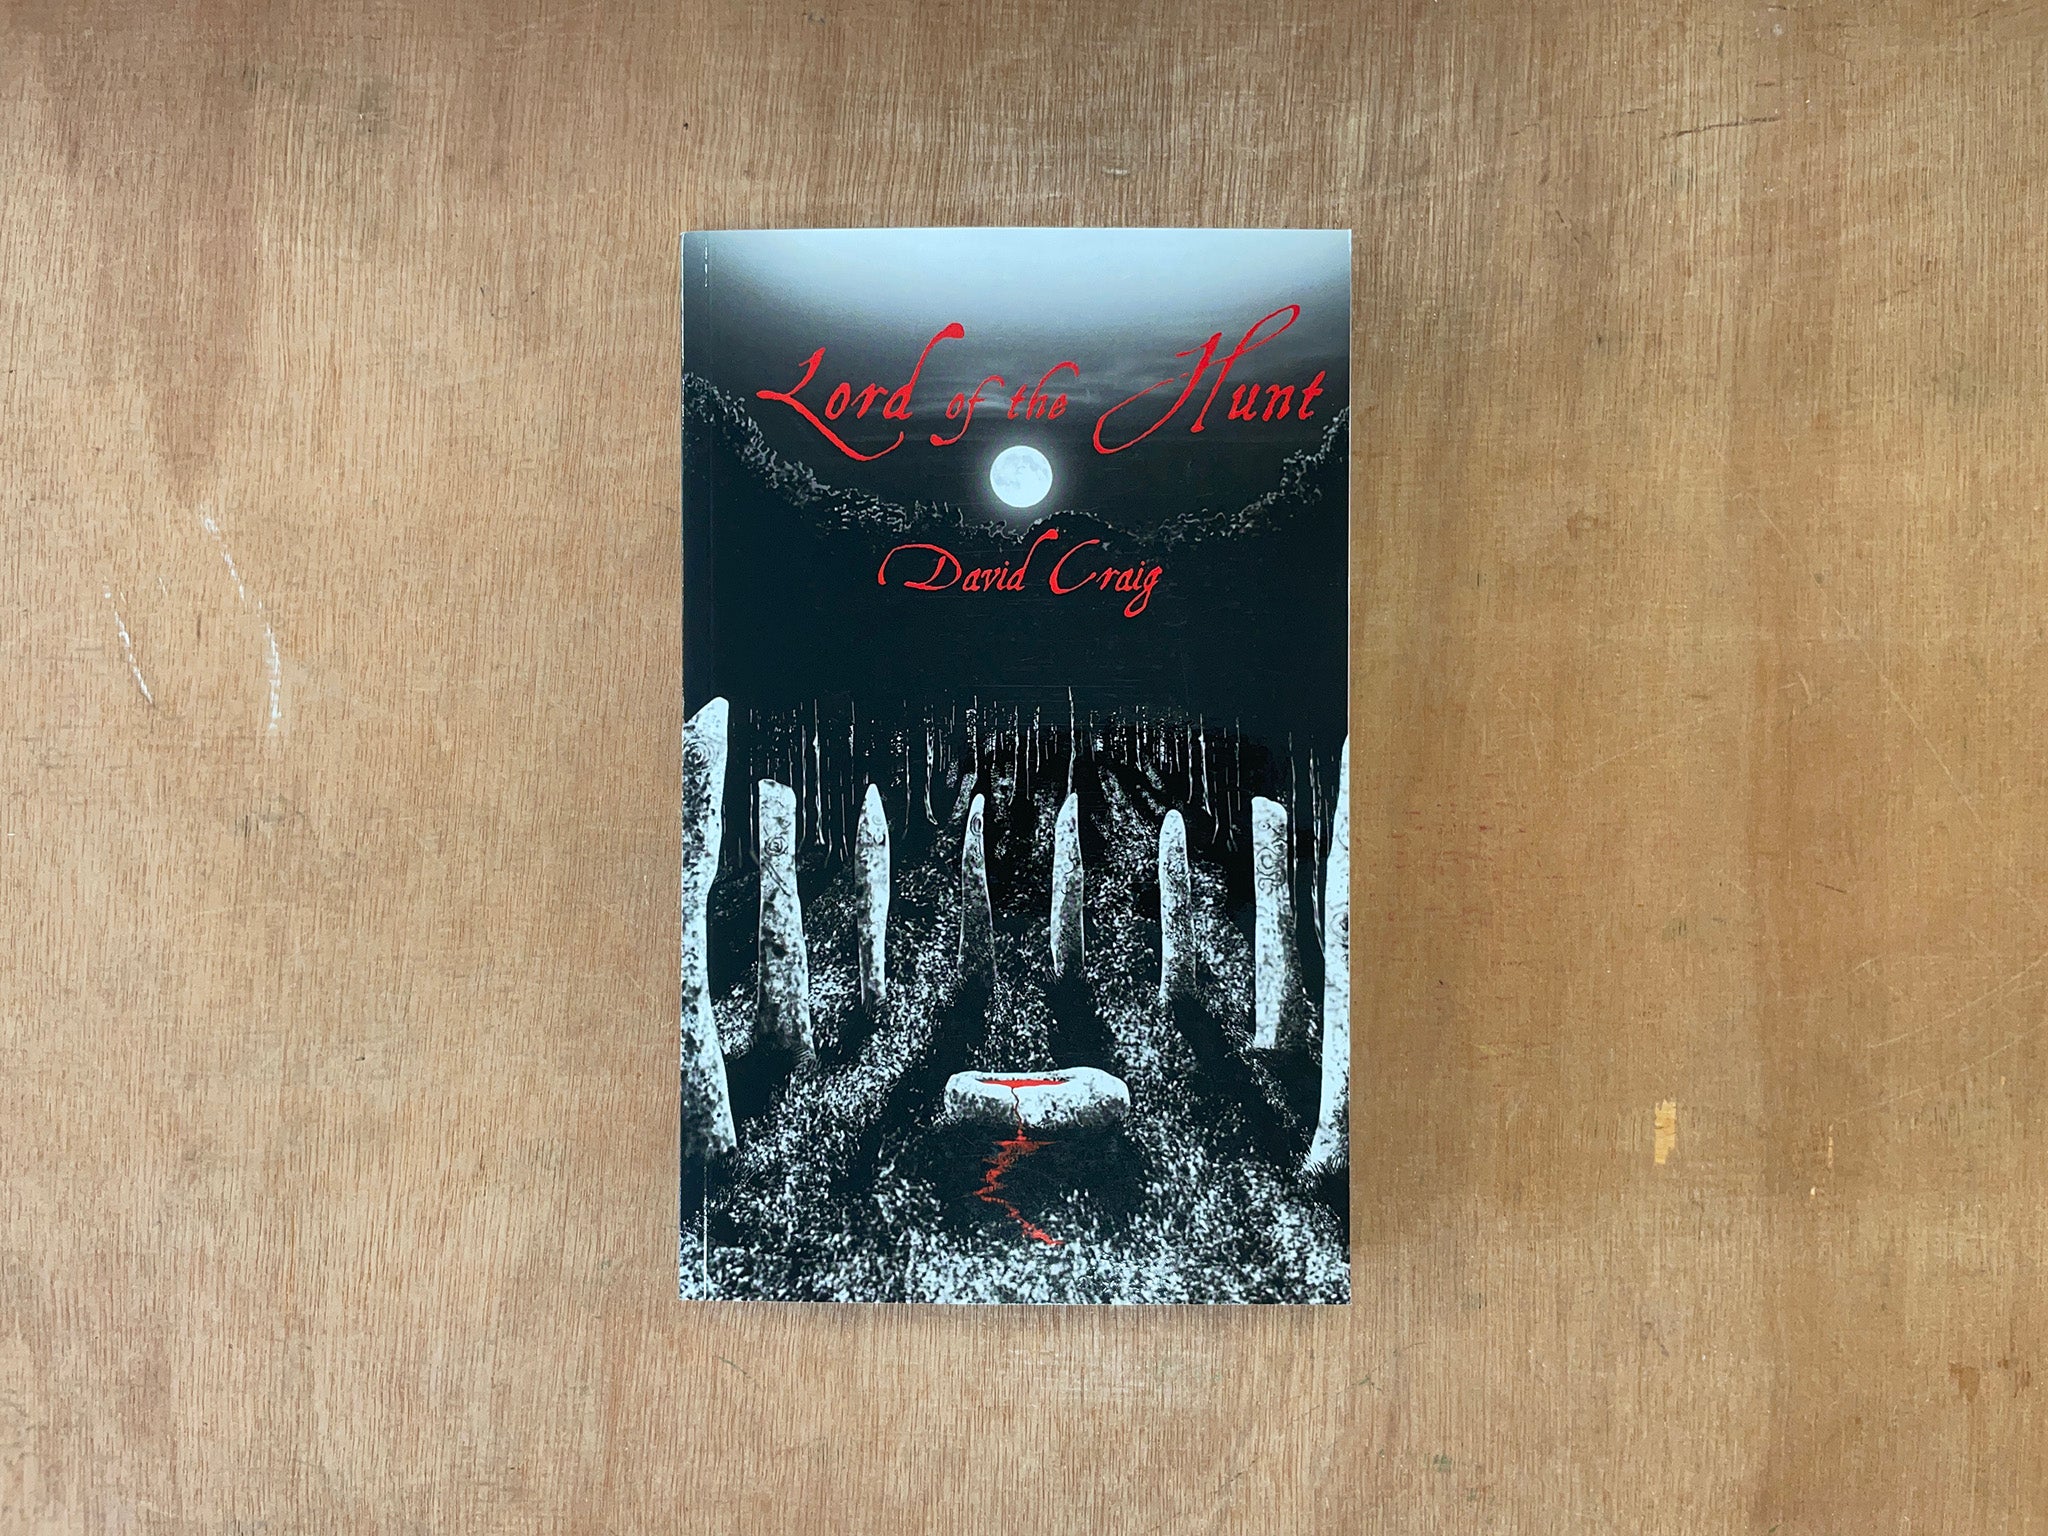 LORD OF THE HUNT by David Craig